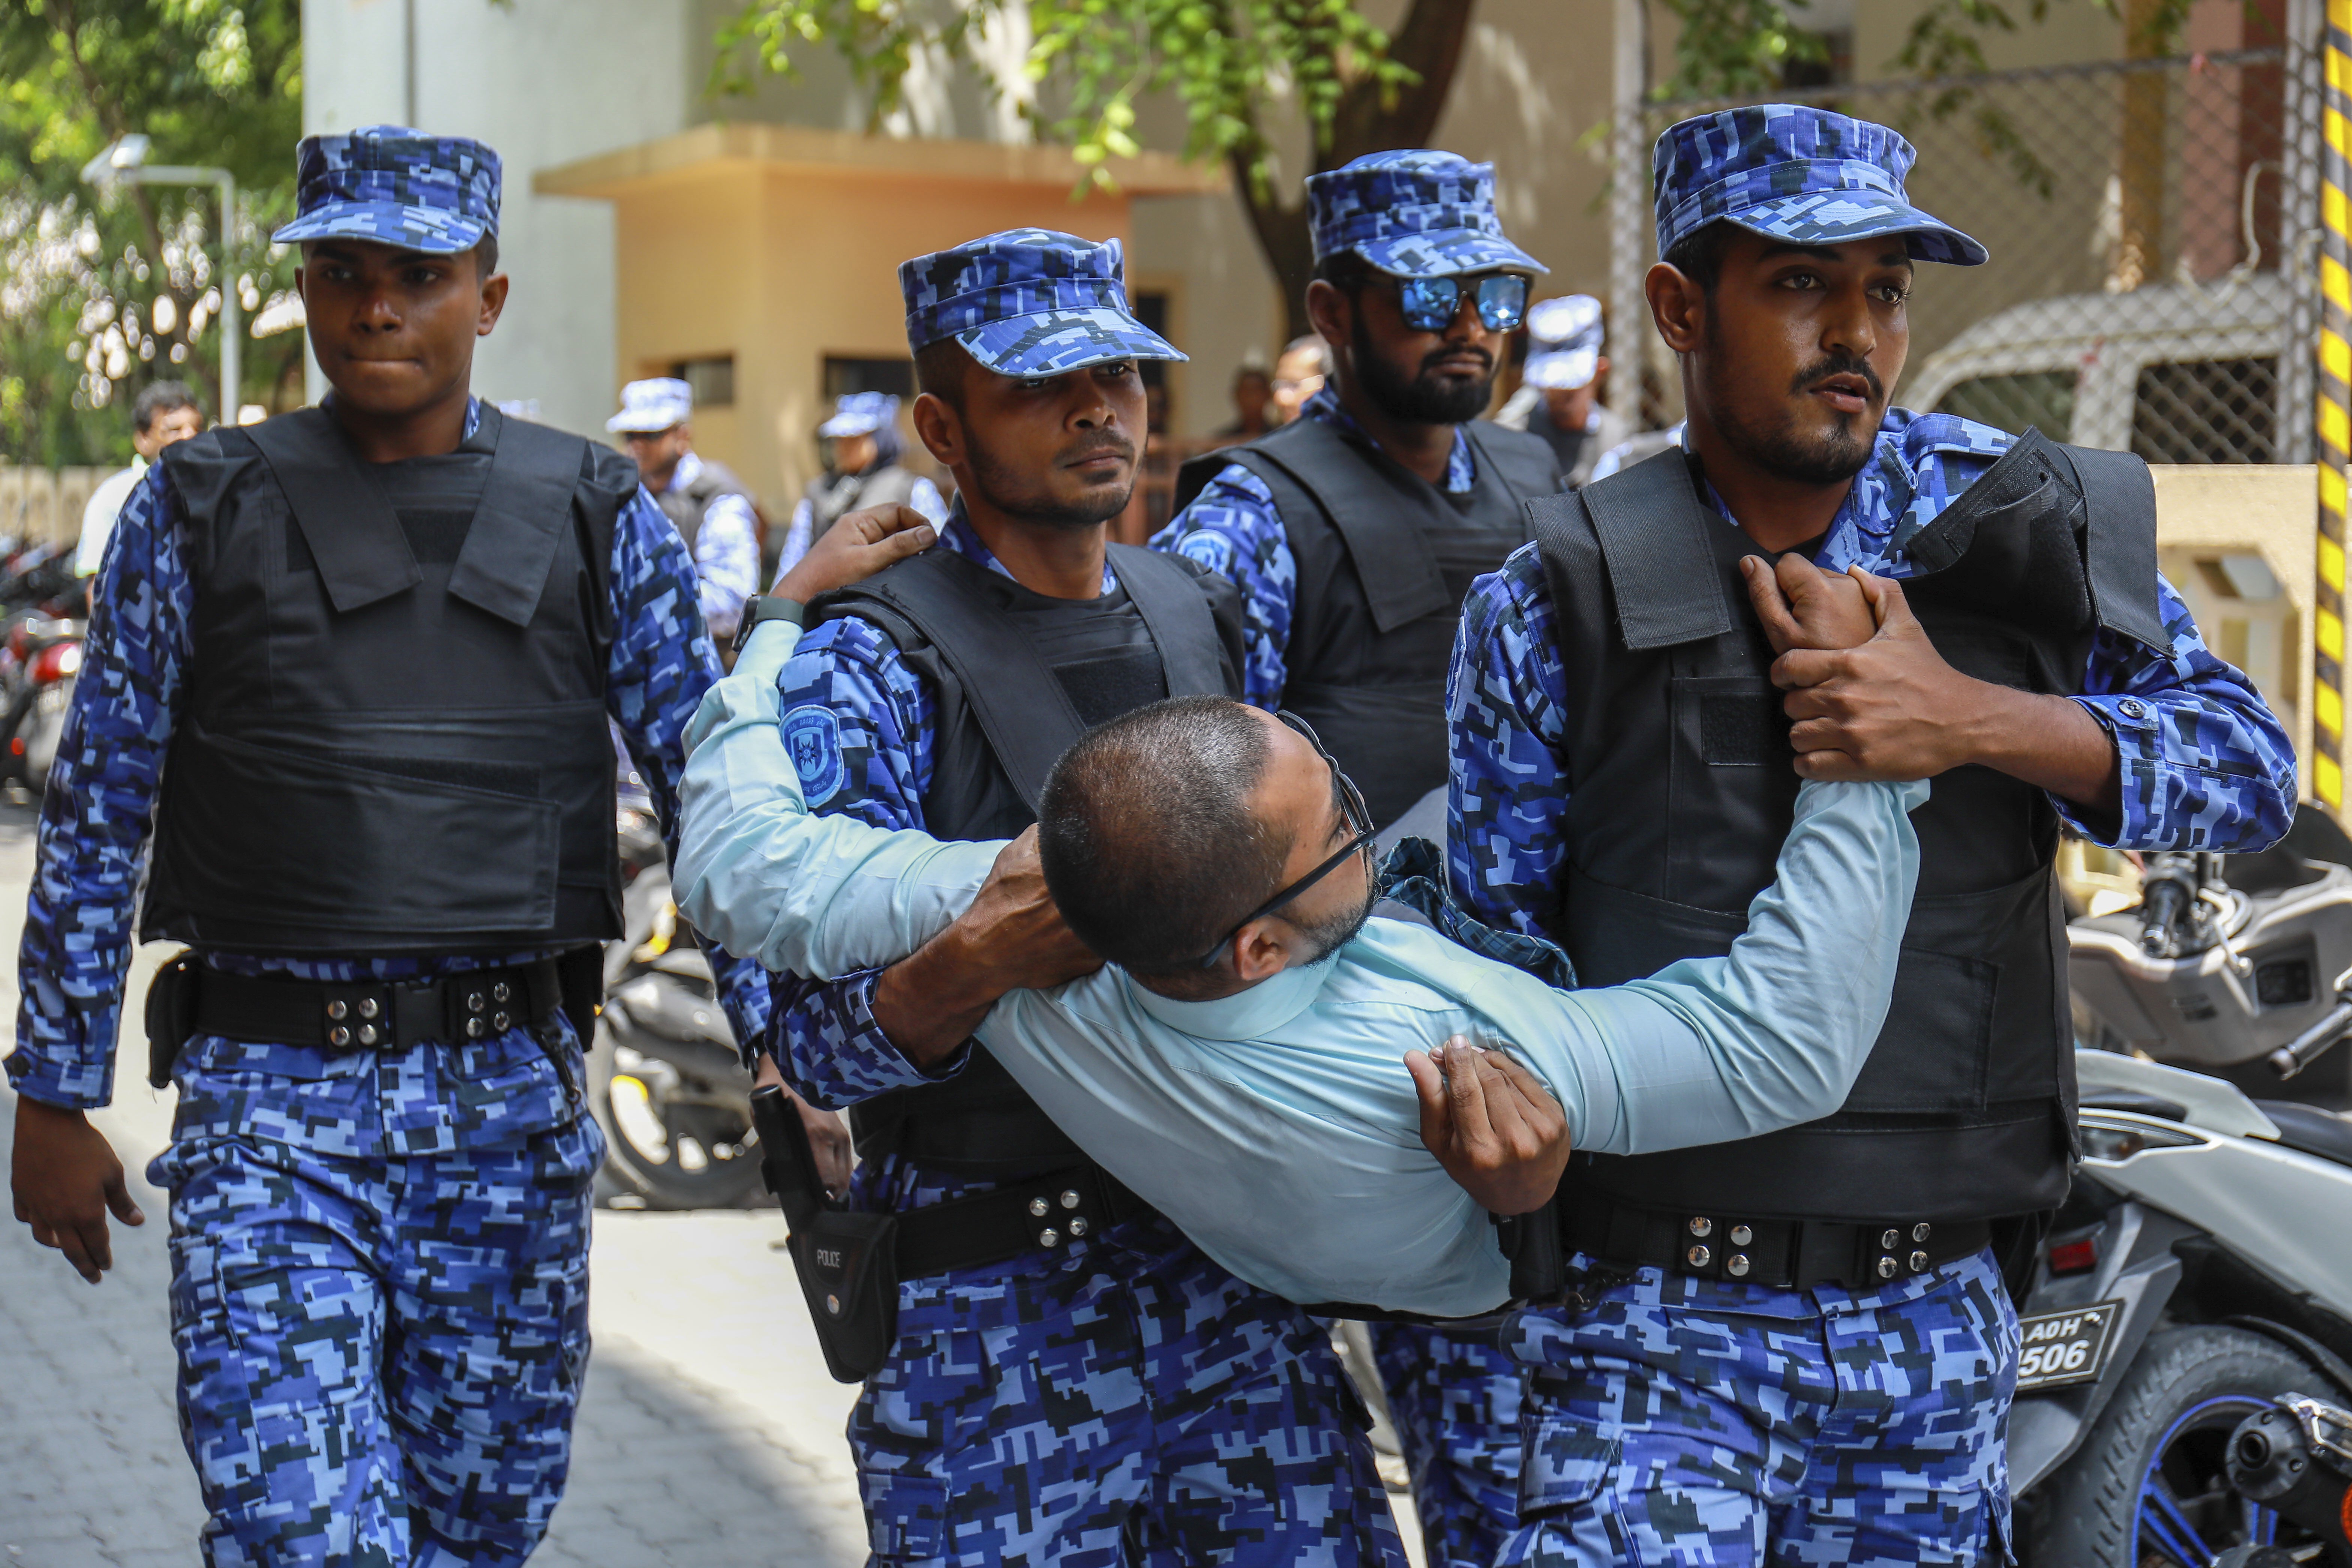 Maldivian police remove an opposition member who tried to enter a Parliament building that closed following the state of emergency. Photo: AP